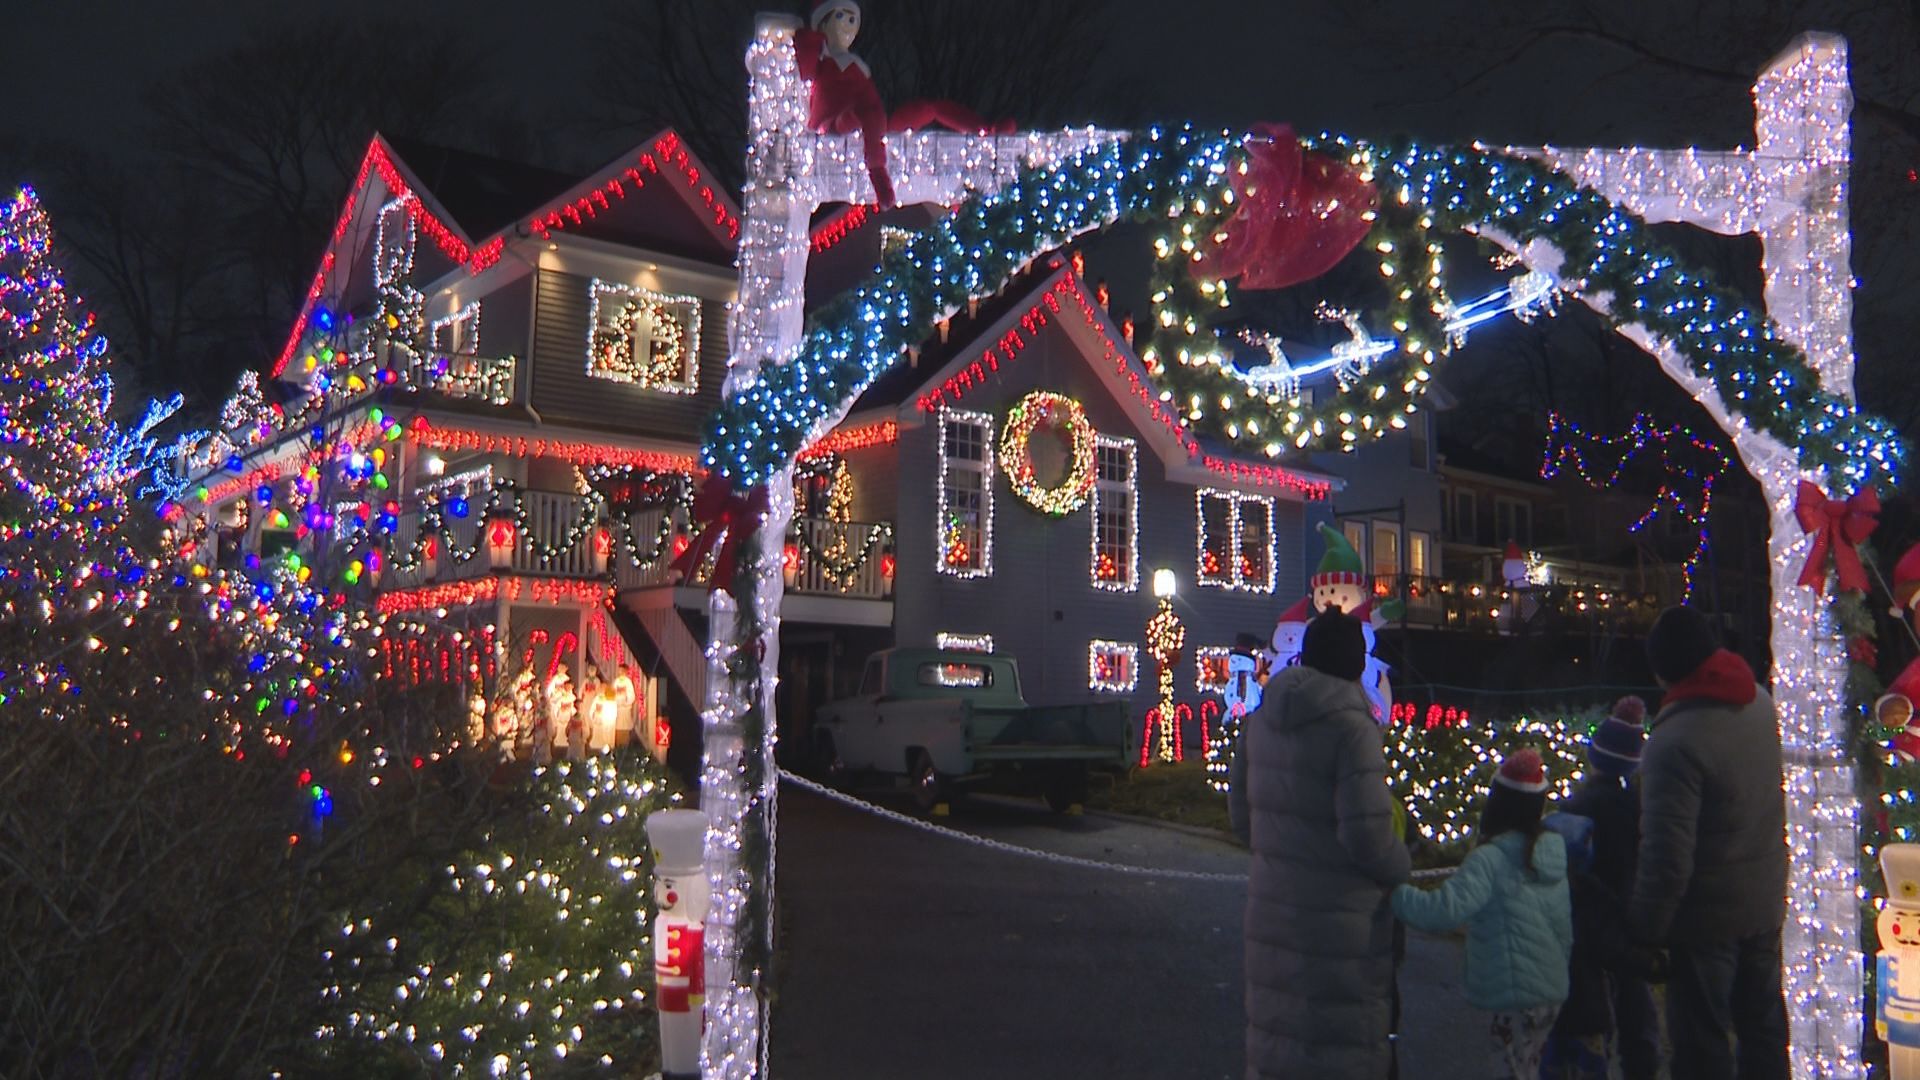 The story behind 2 brothers’ Christmas displays and how they keep lifting spirts